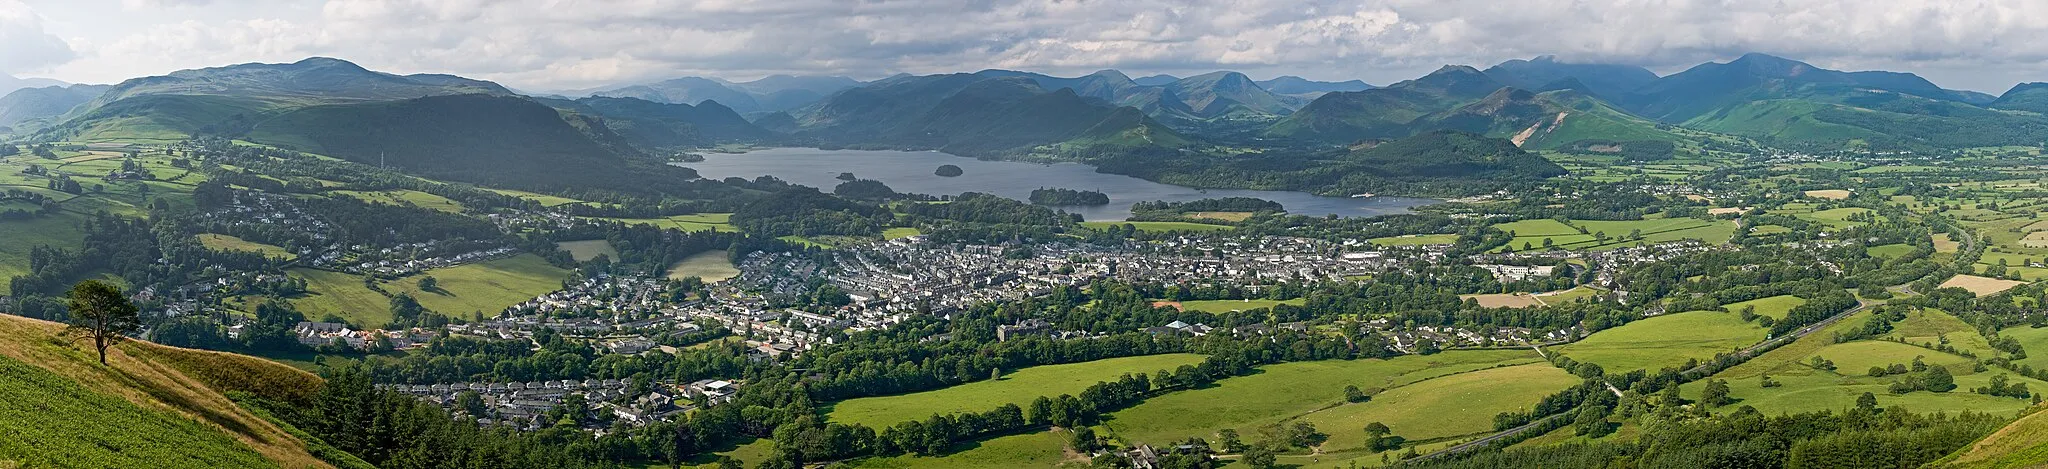 Photo showing: A 2 x 16 segment panorama of Keswick, Cumbria, England, as viewed from Latrigg north of the town.